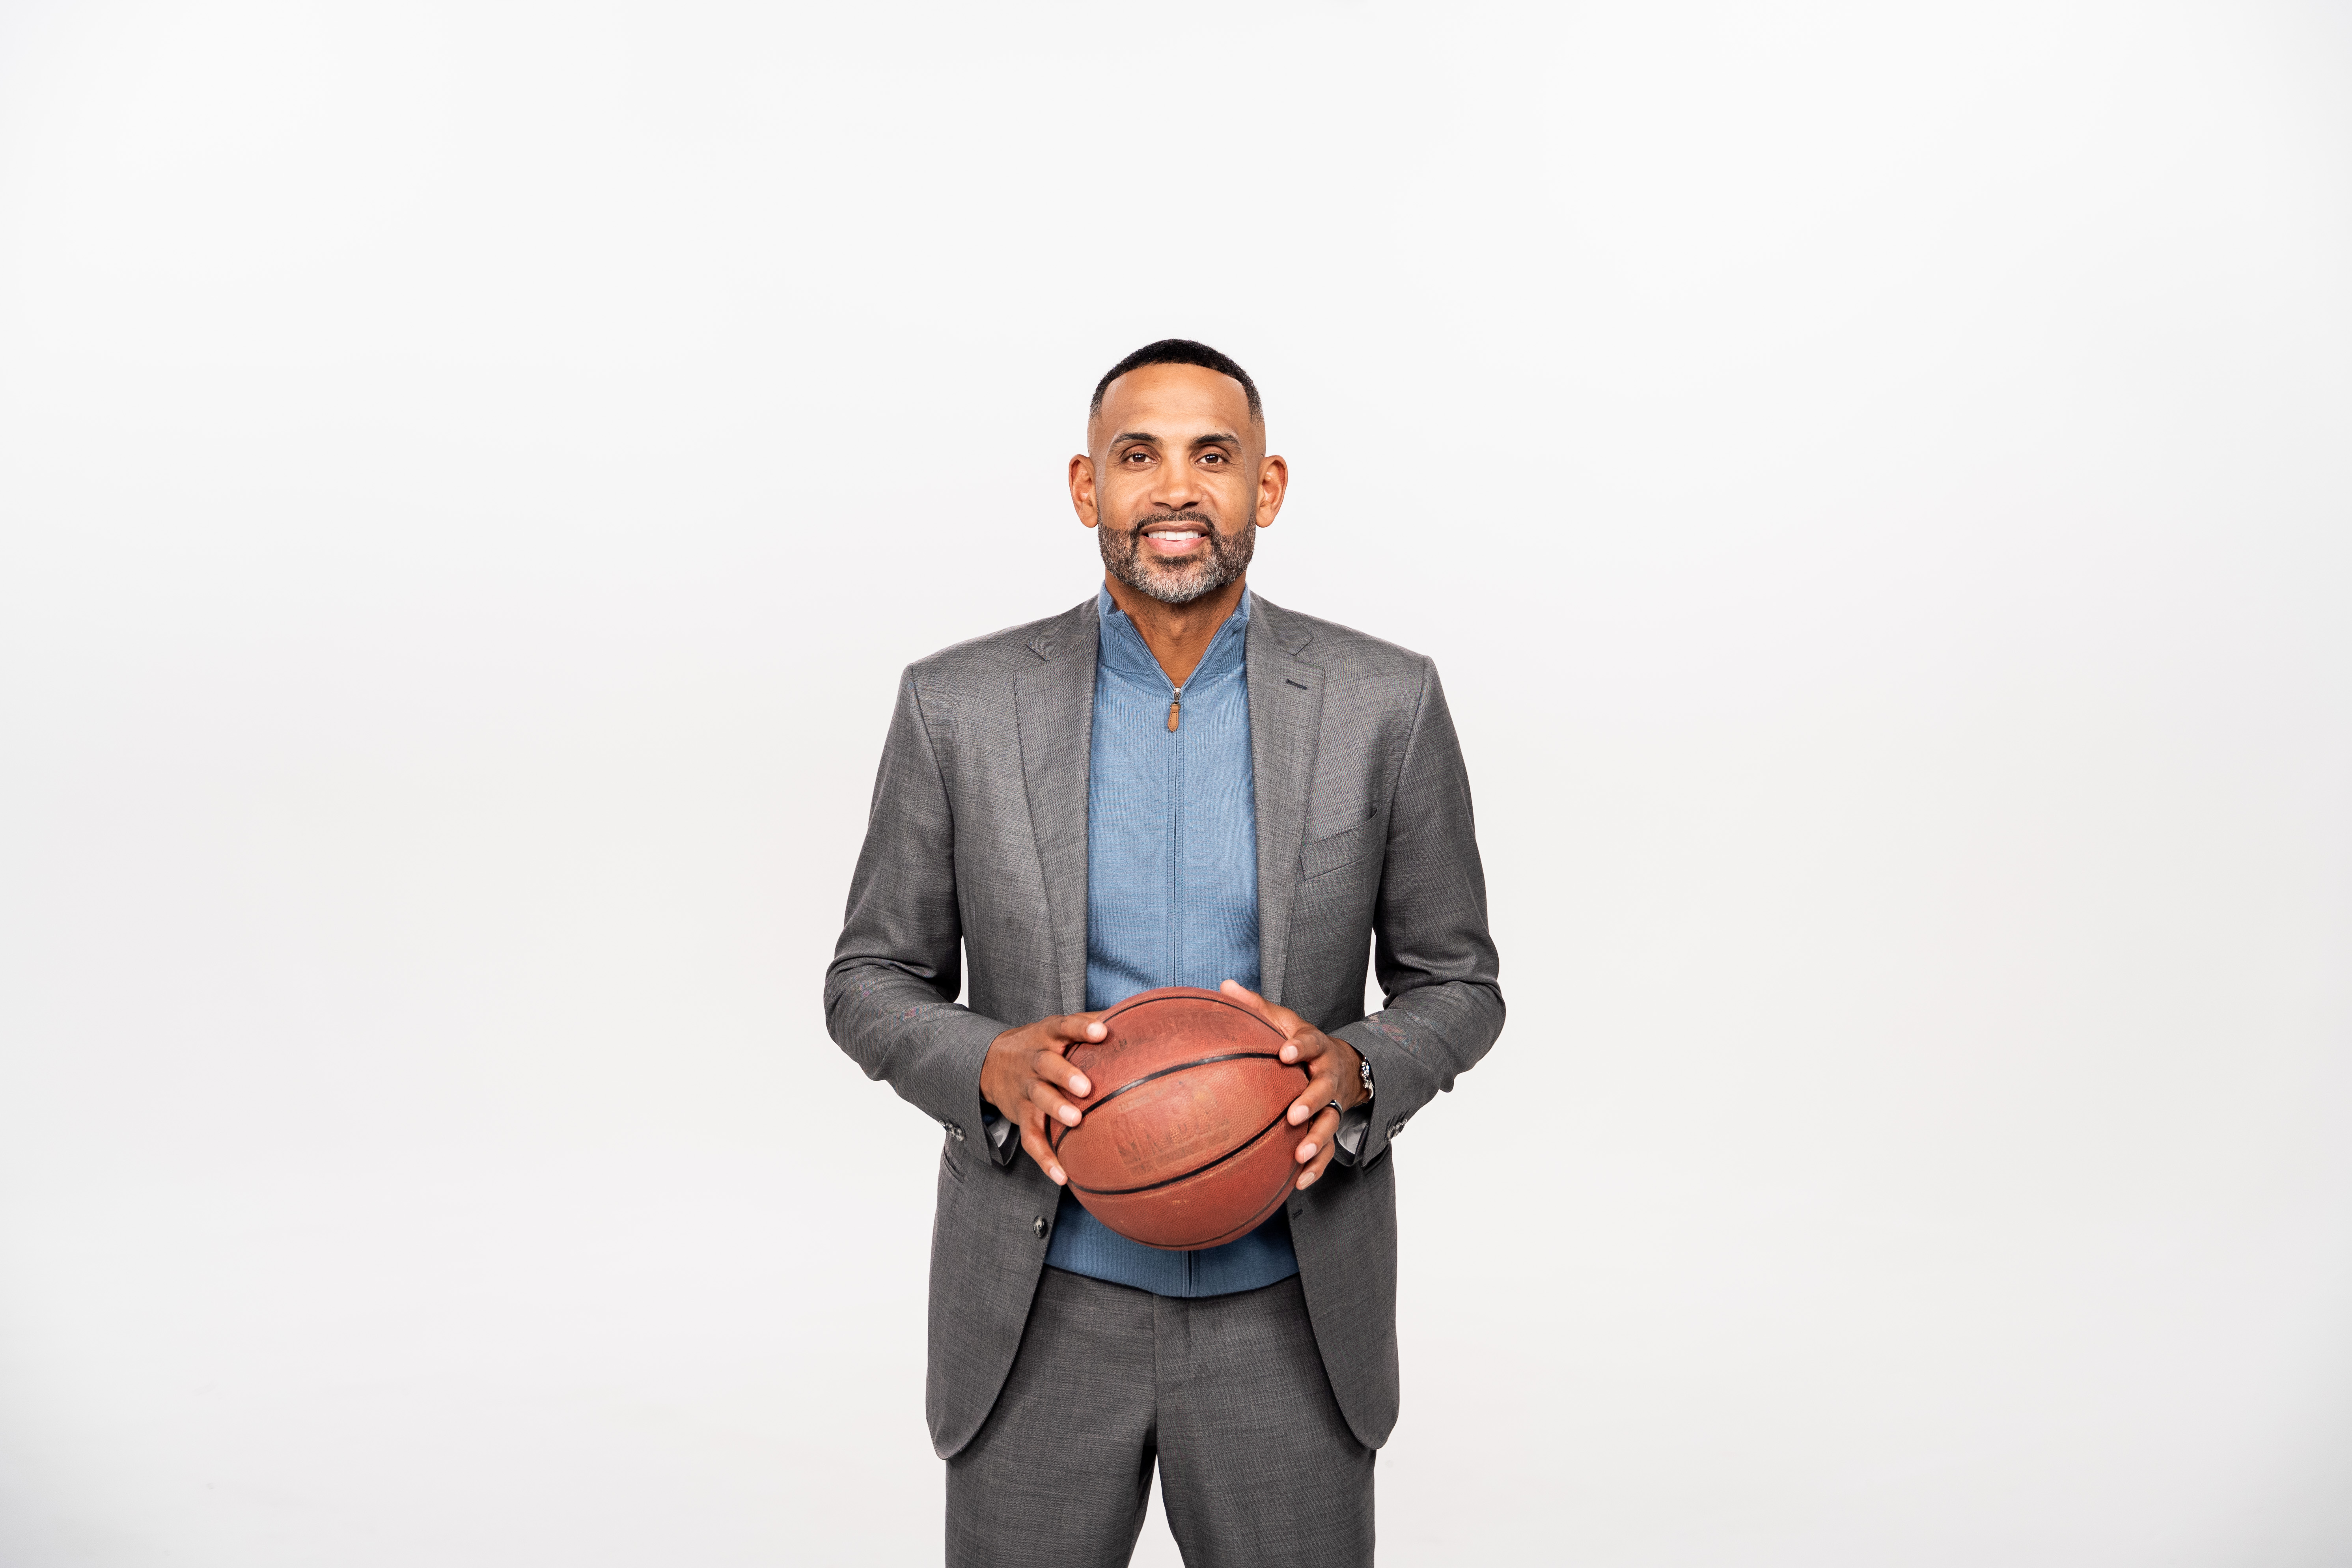 Dendreon ups its Provenge marketing game with help of NBA all-star Grant Hill